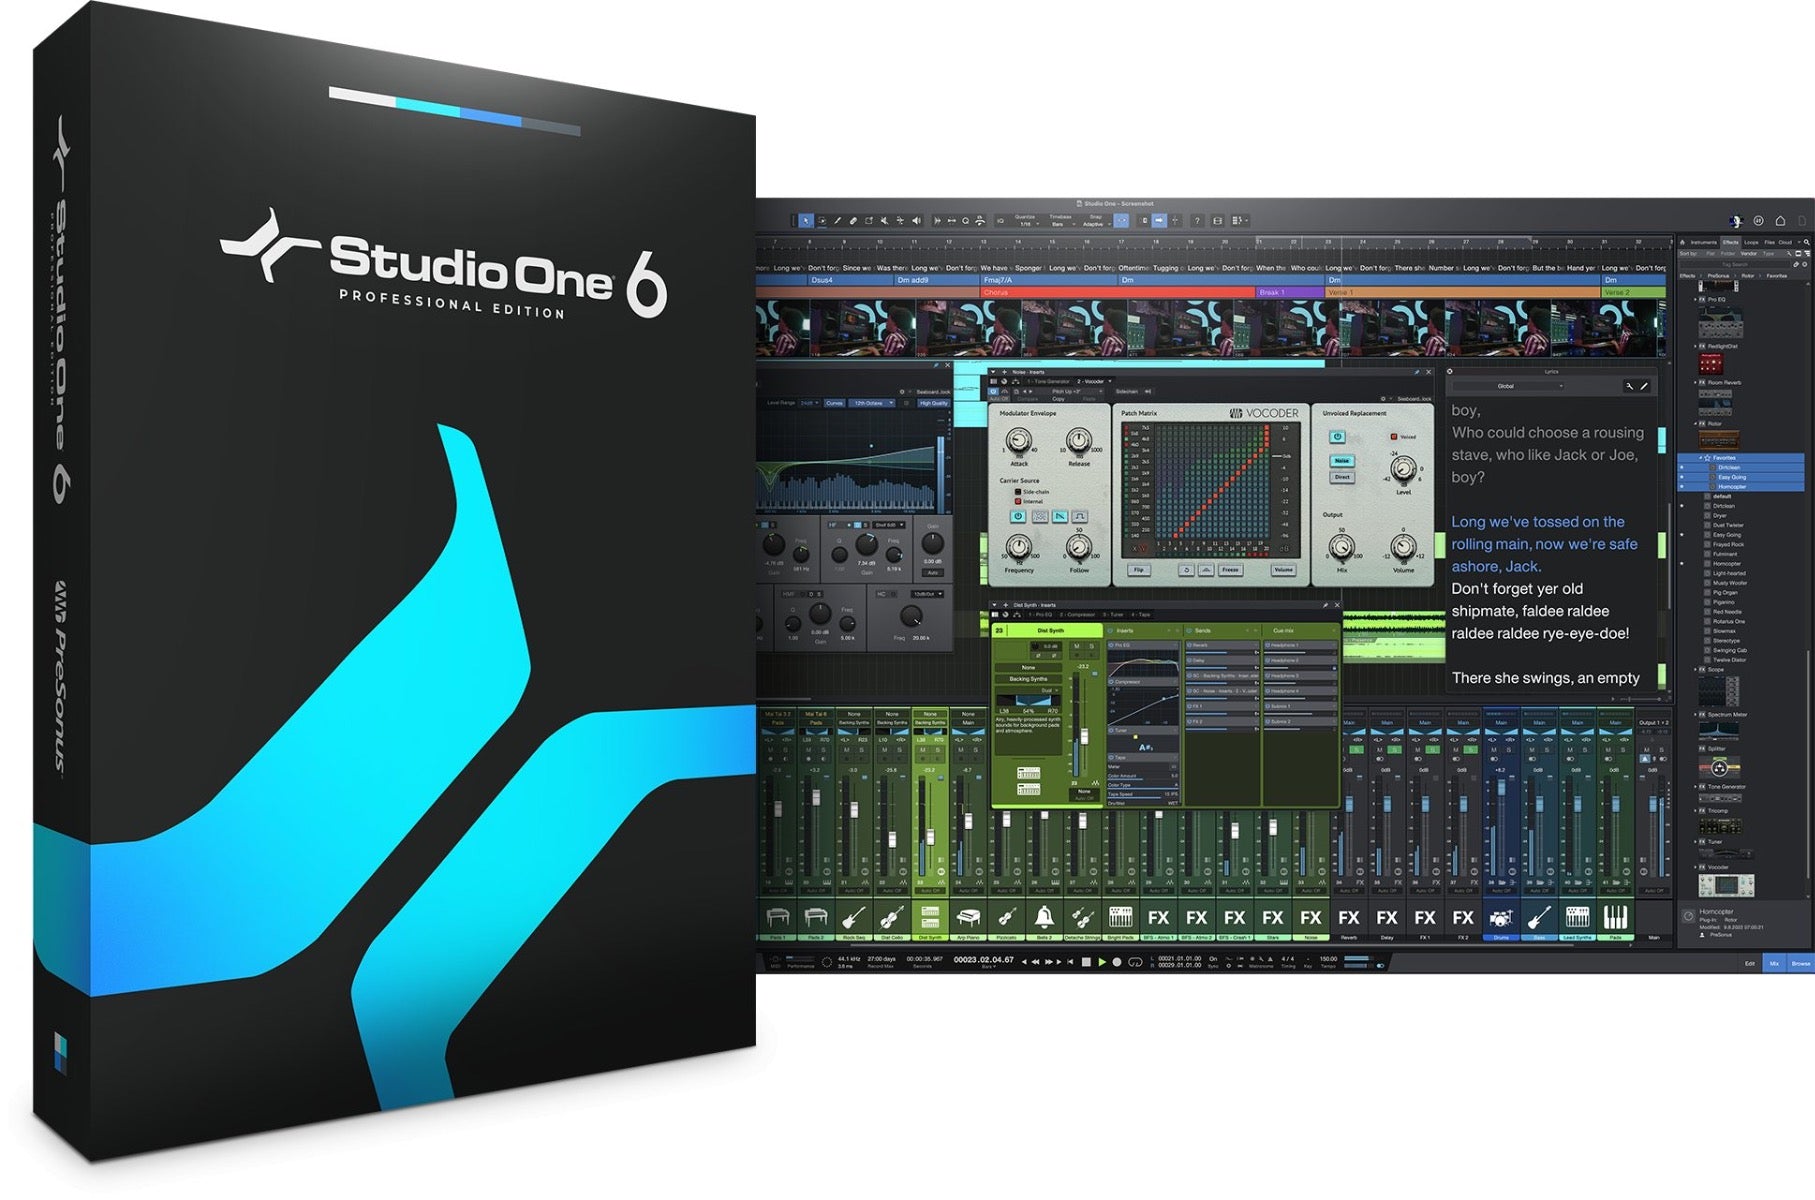 PreSonus Studio One 6 Pro upgrade from Professional or Producer *DOWNLOAD*, View 1